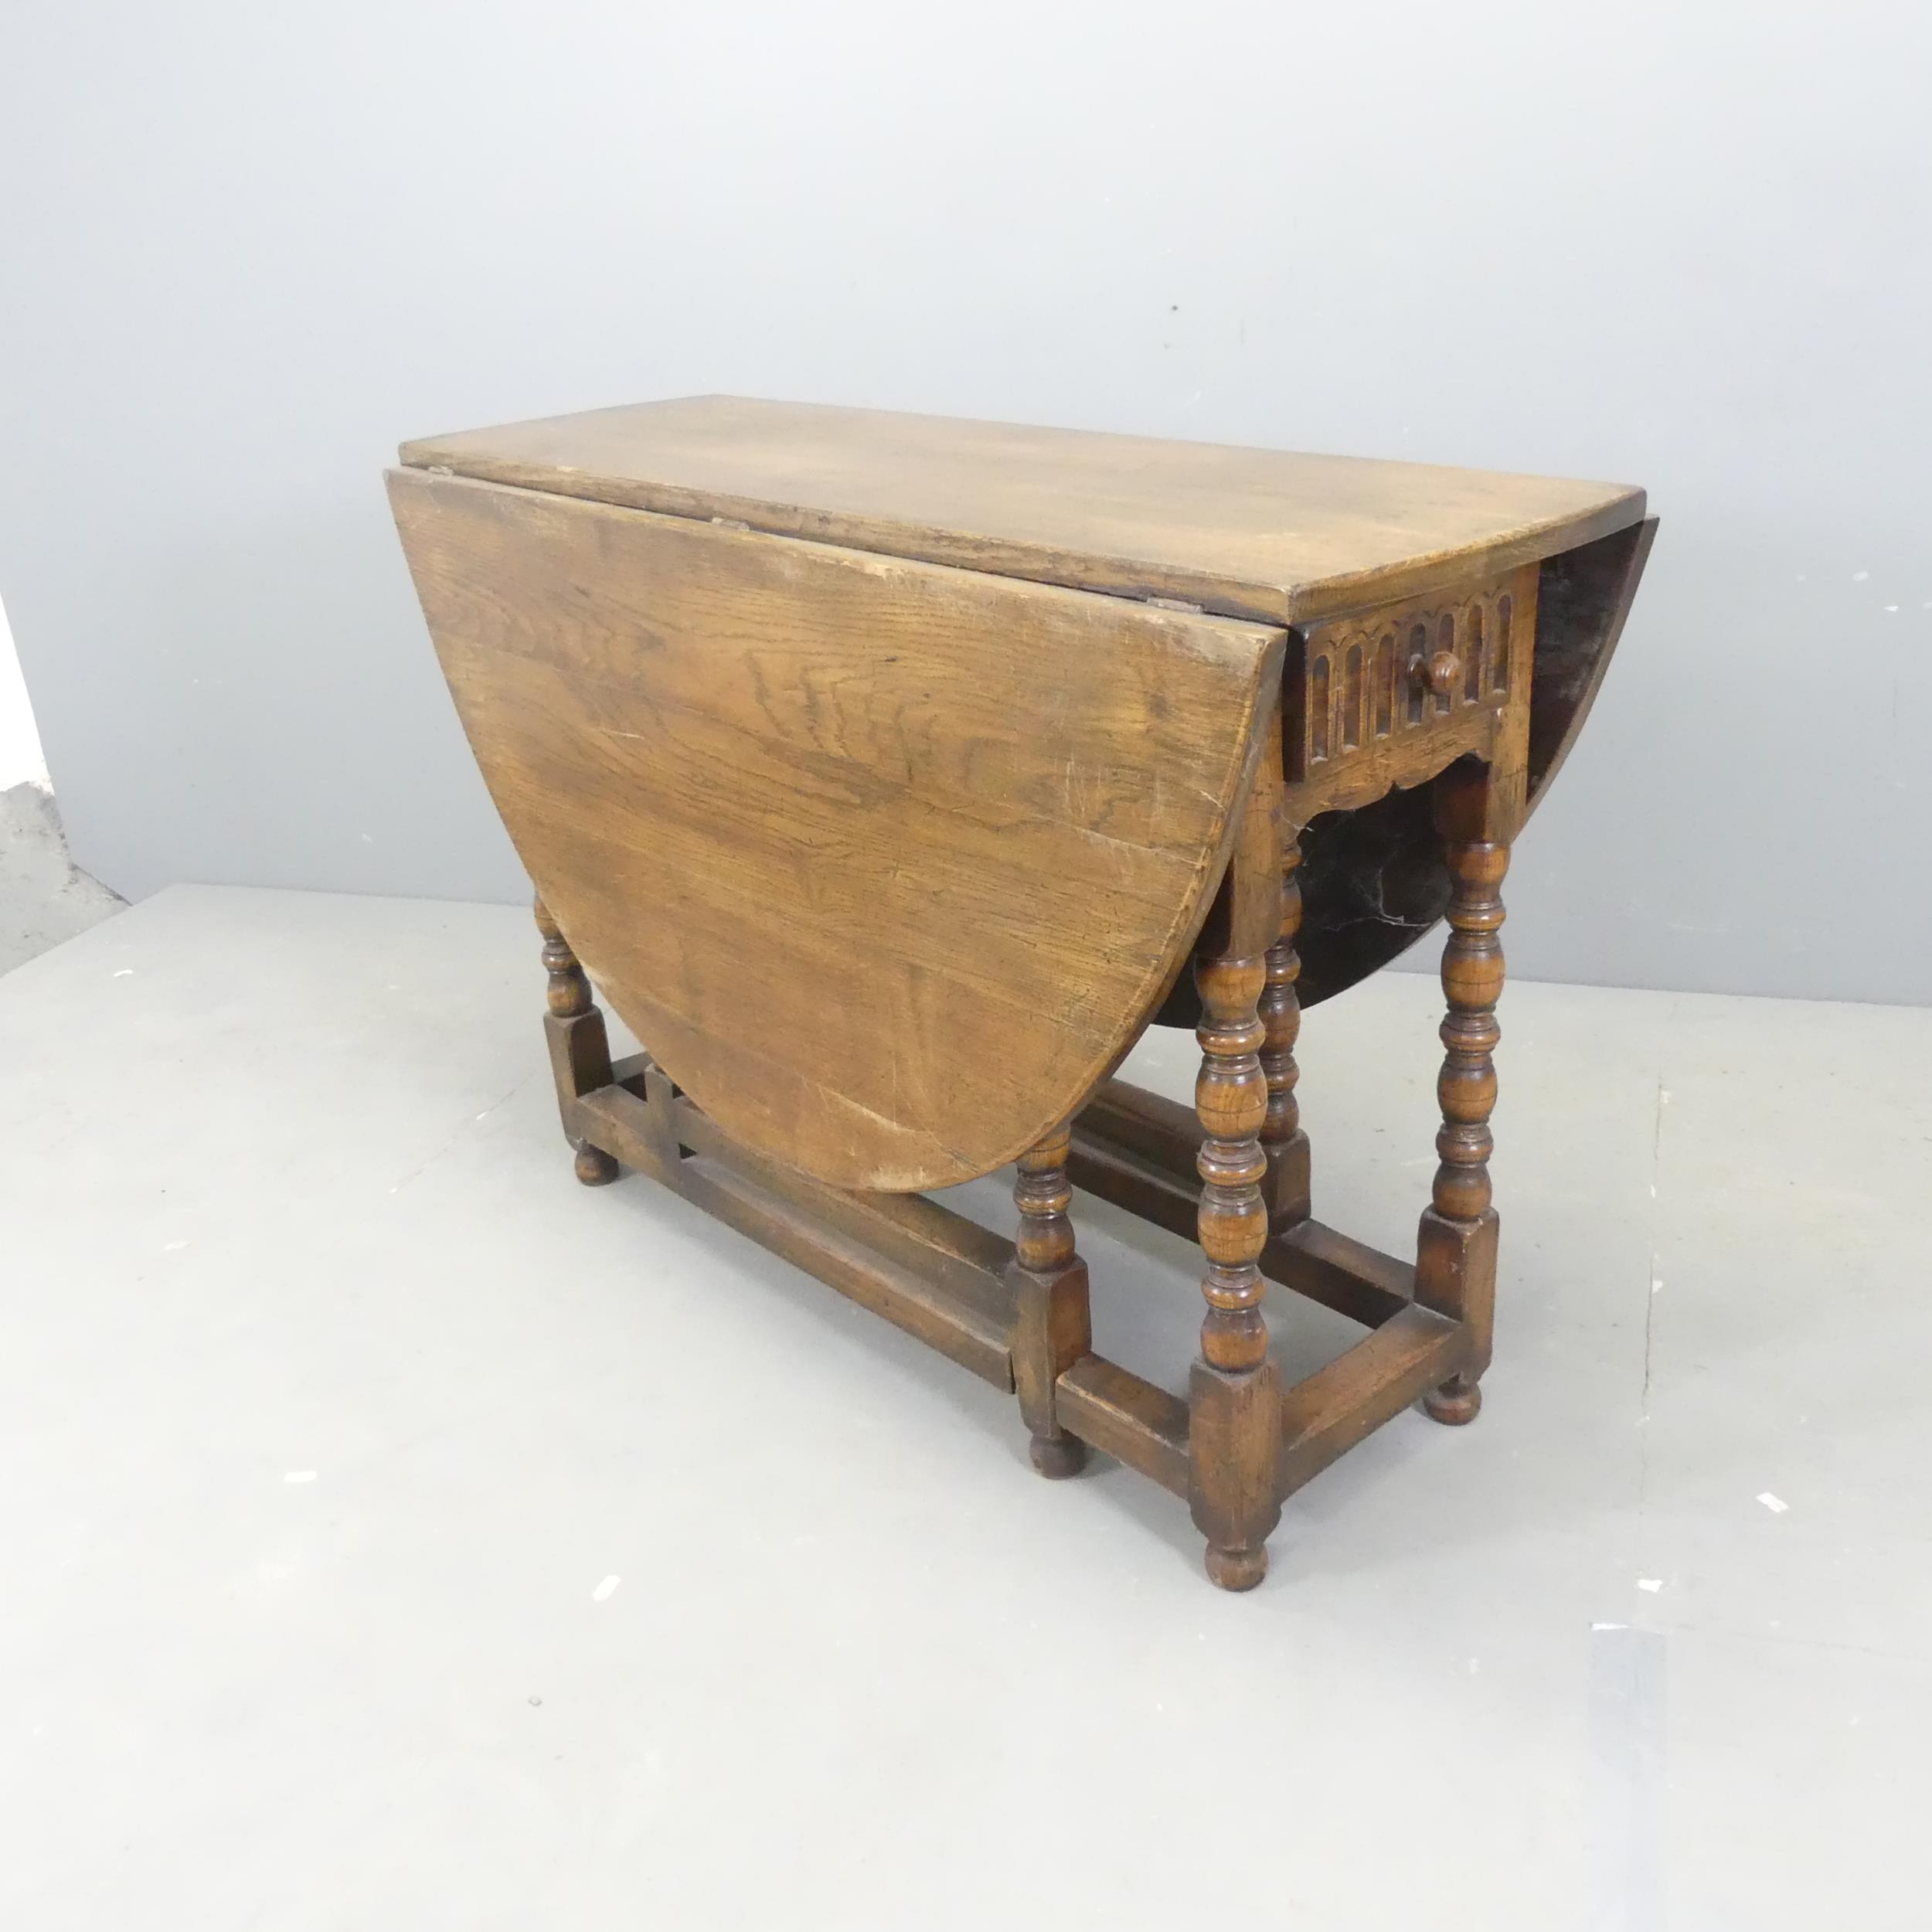 An early 20th century oak oval gate-leg dining table, with linenfold carved decoration, end frieze